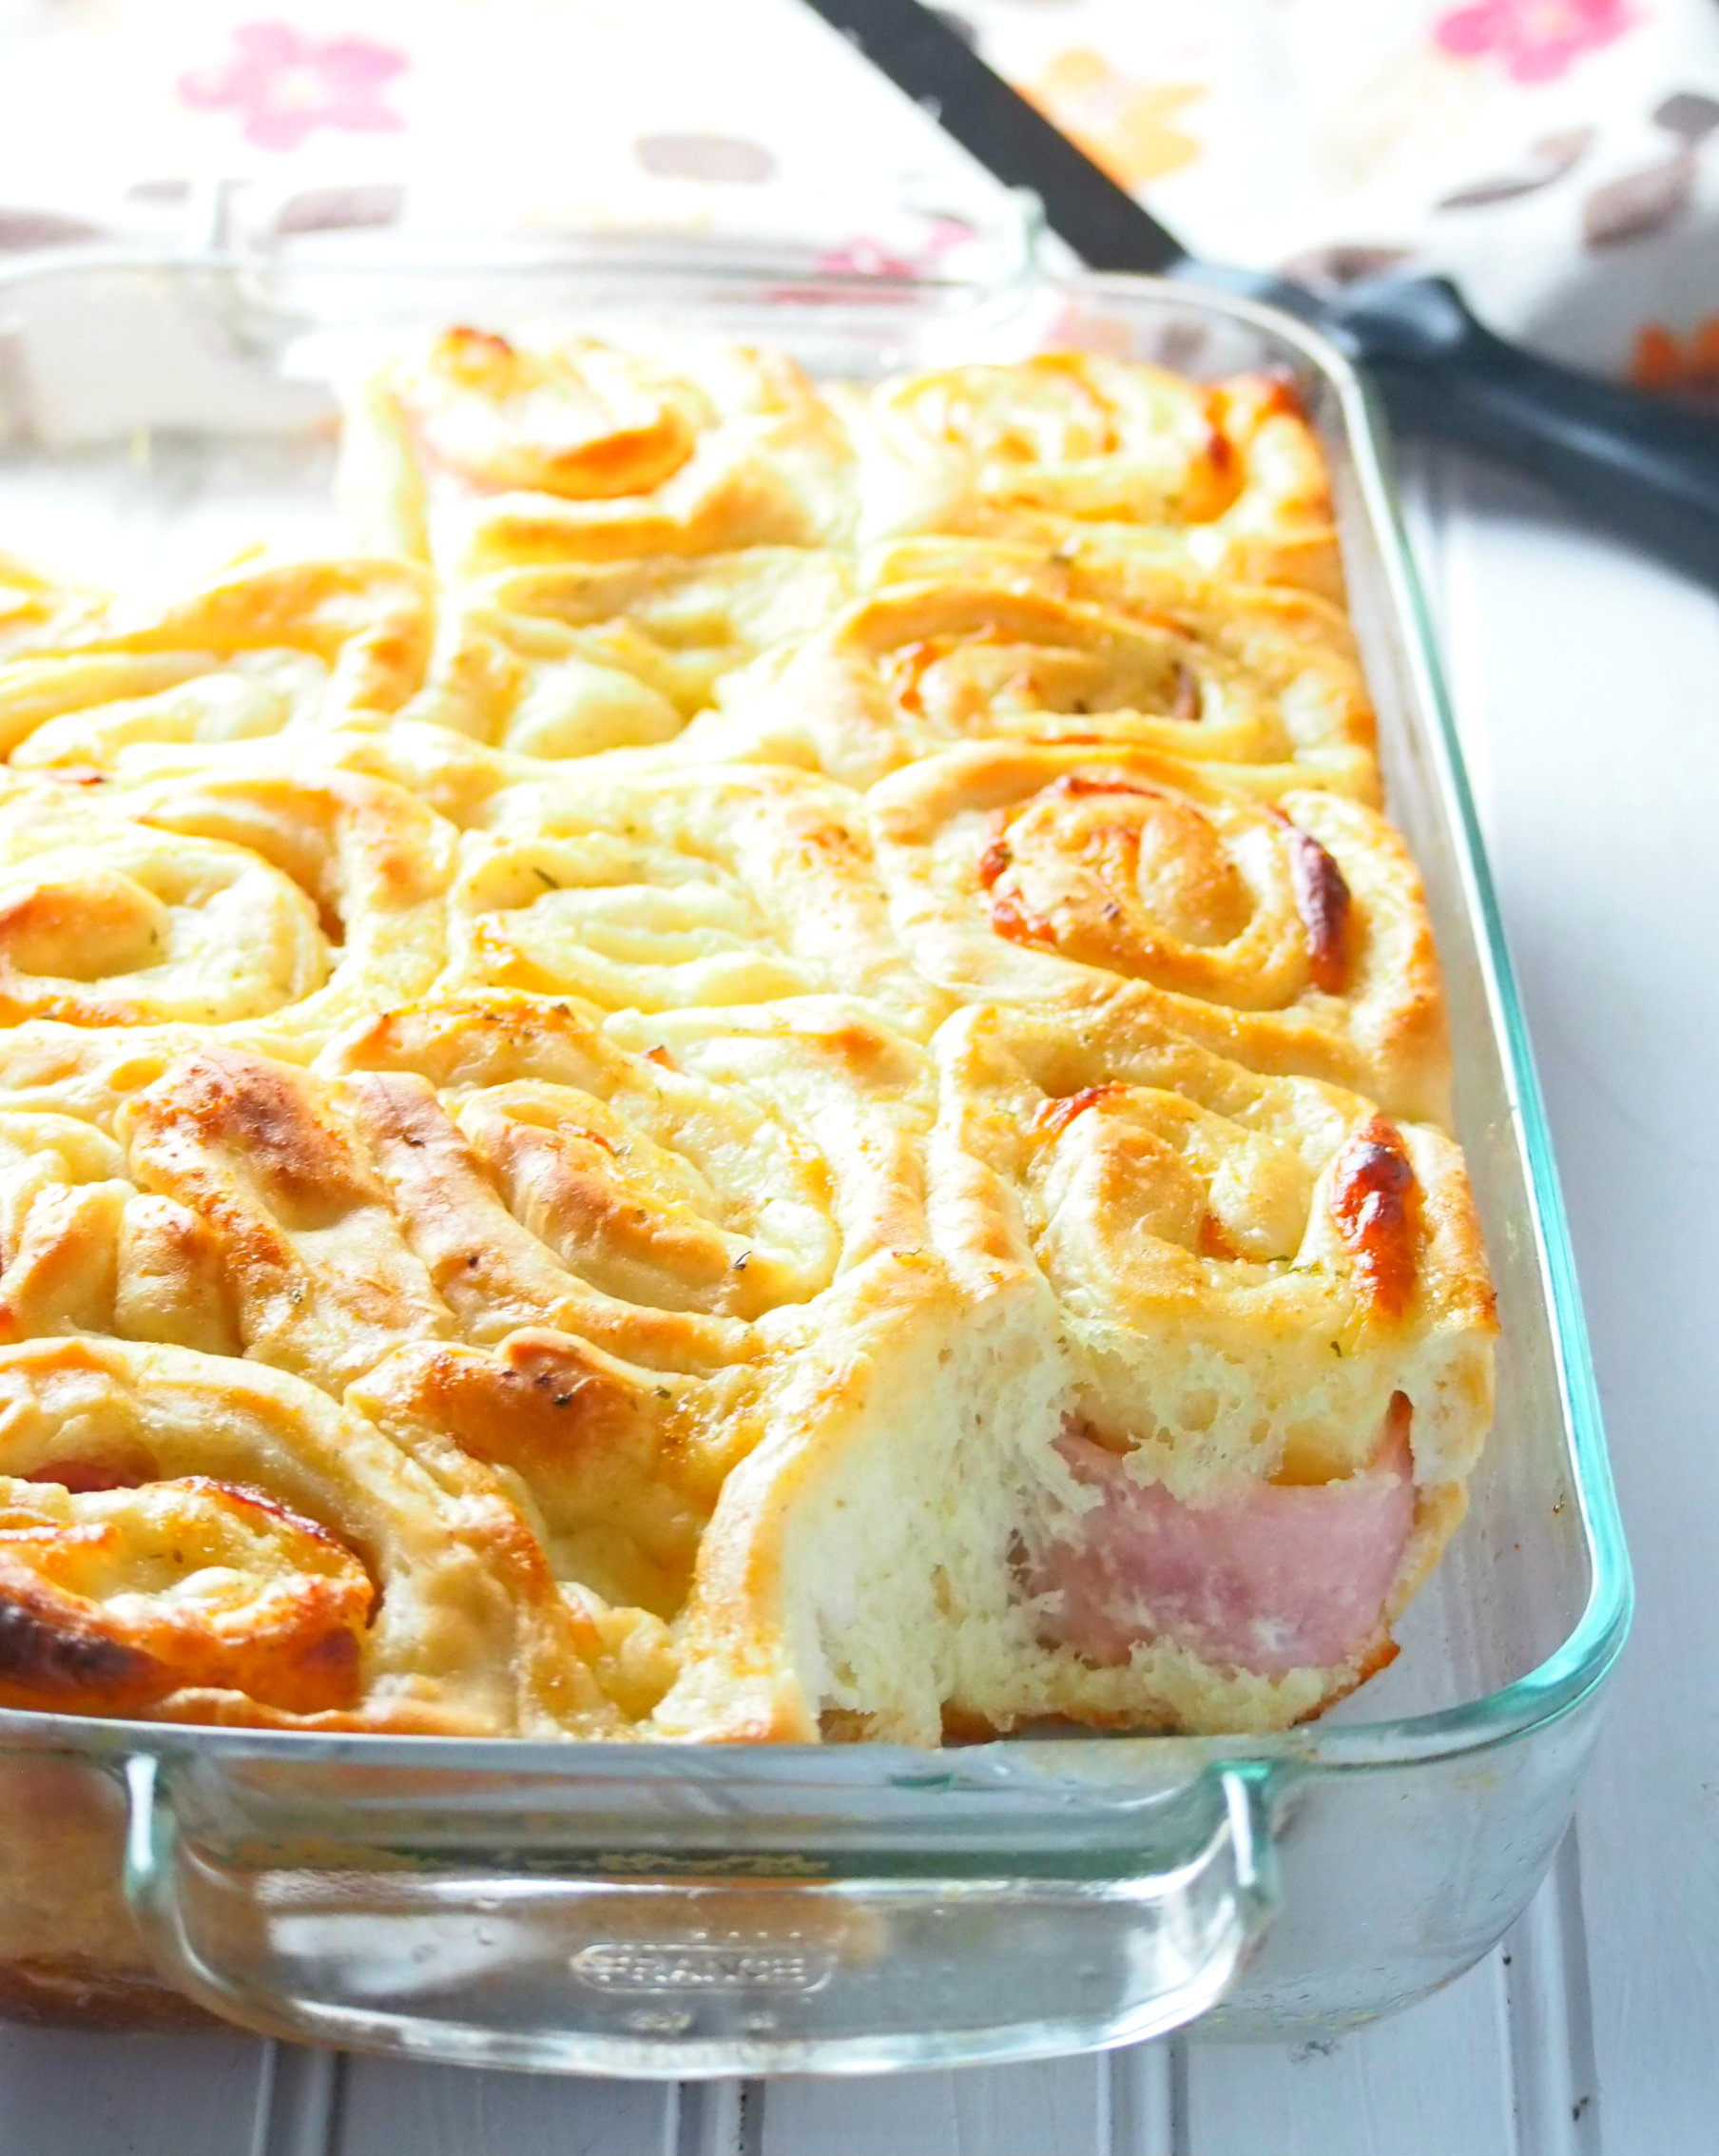 flavorful, soft and garlicky ham and cheese rolls to fill you up at breakfast, lunch or snack time.